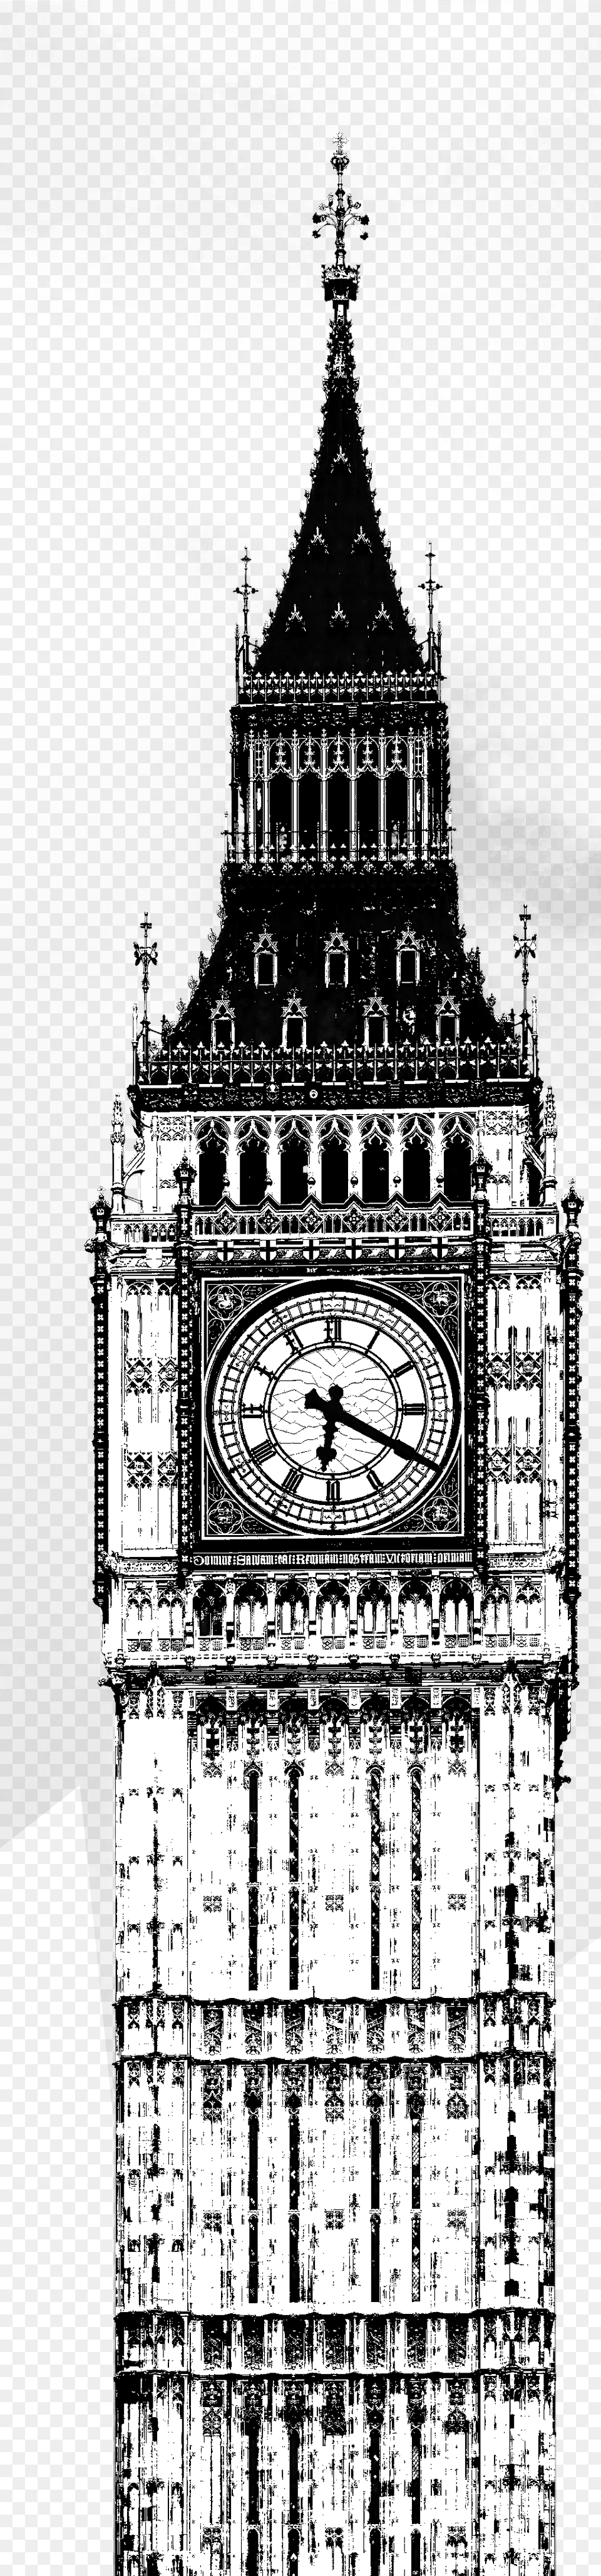 London Clock Tower Hd Big Ben, Architecture, Building, Clock Tower, Bell Tower Free Transparent Png